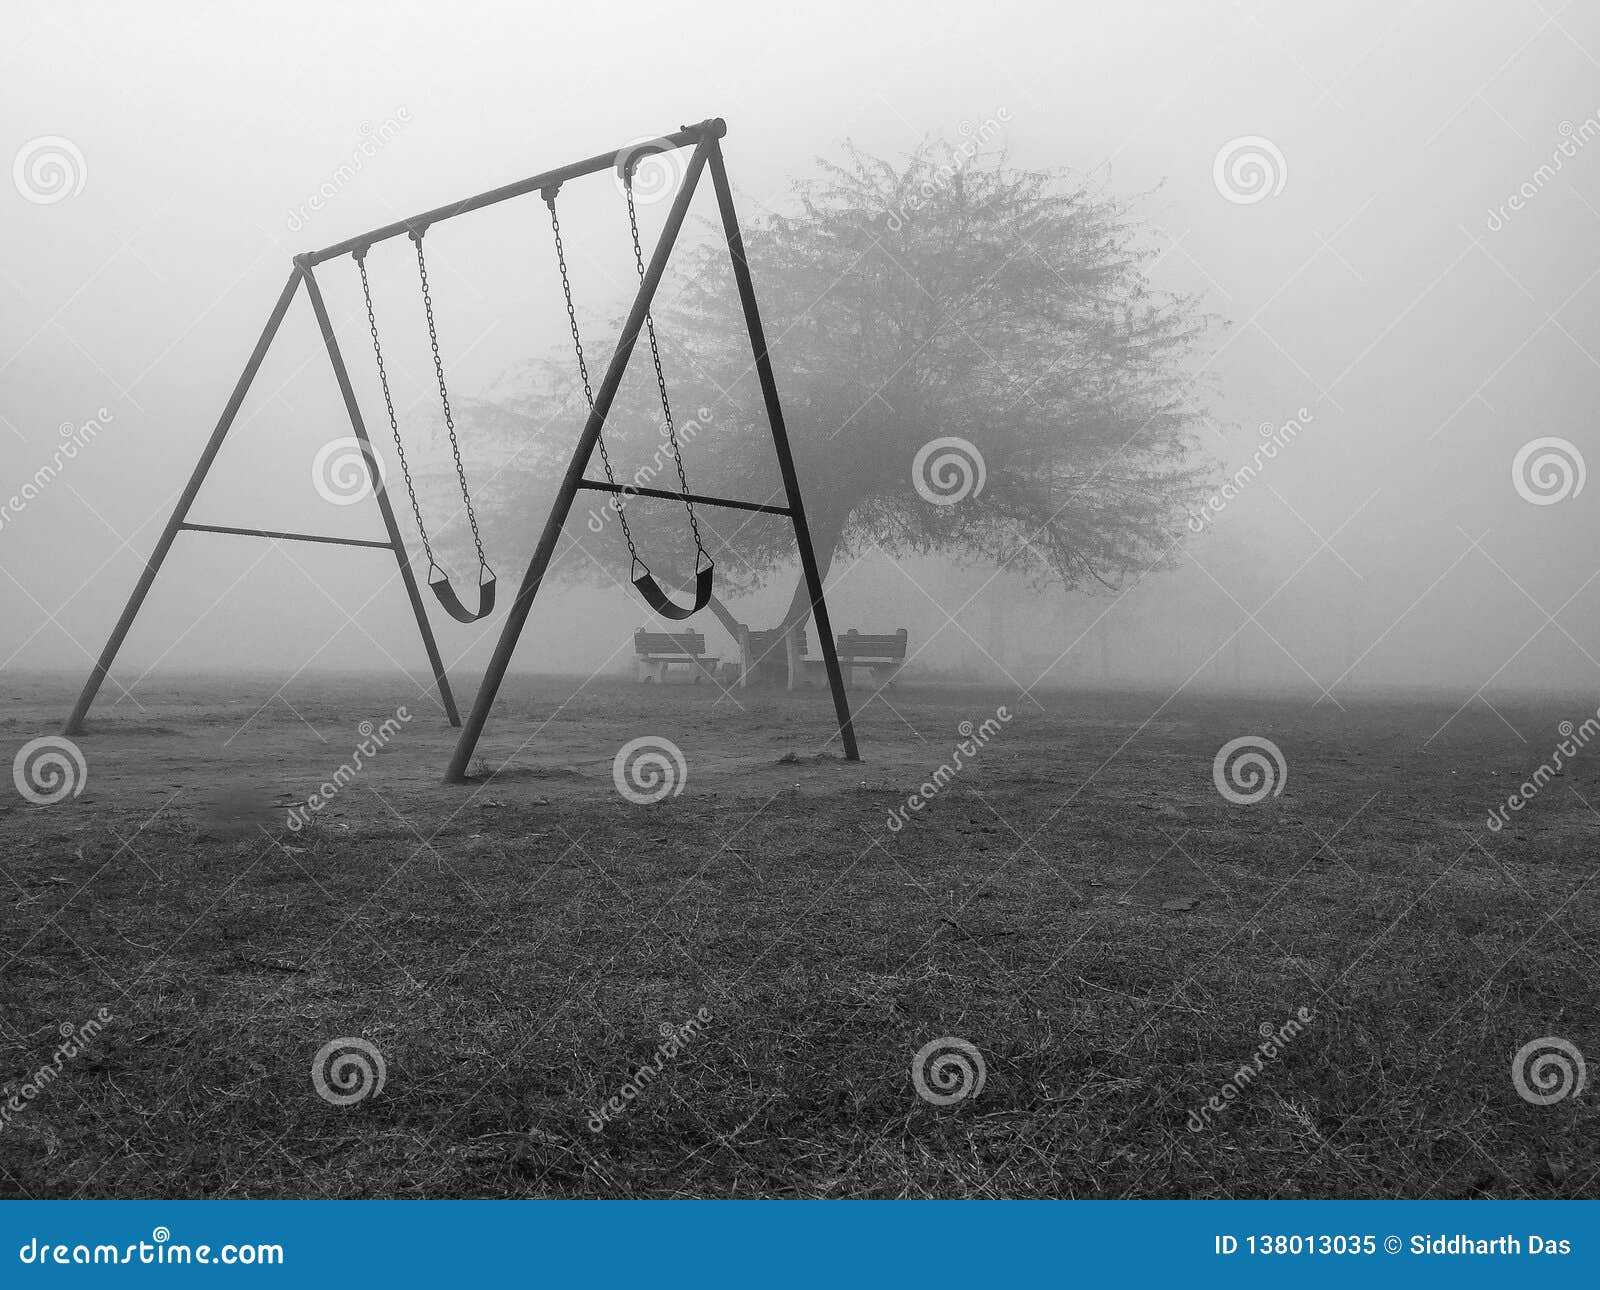 Swings, Trees and Branches in Winter Foggy Weather Stock Image - Image